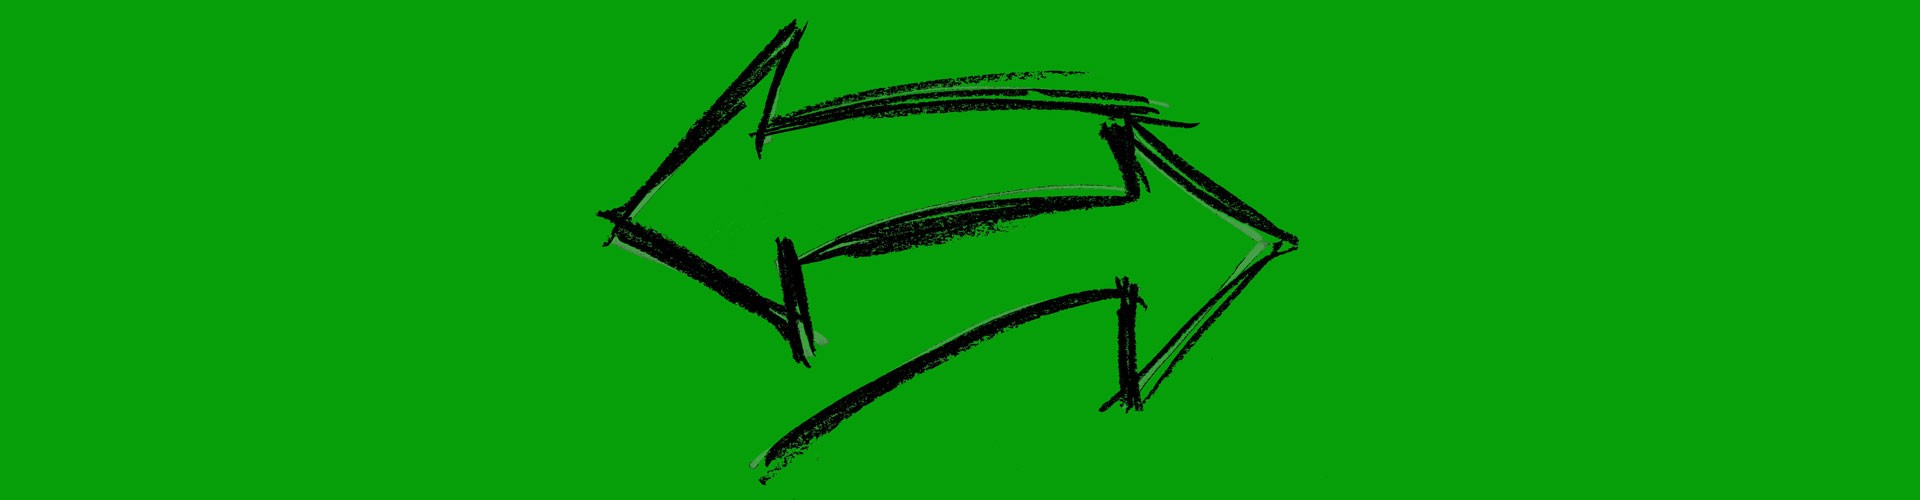 sketch of switching arrows on a green background